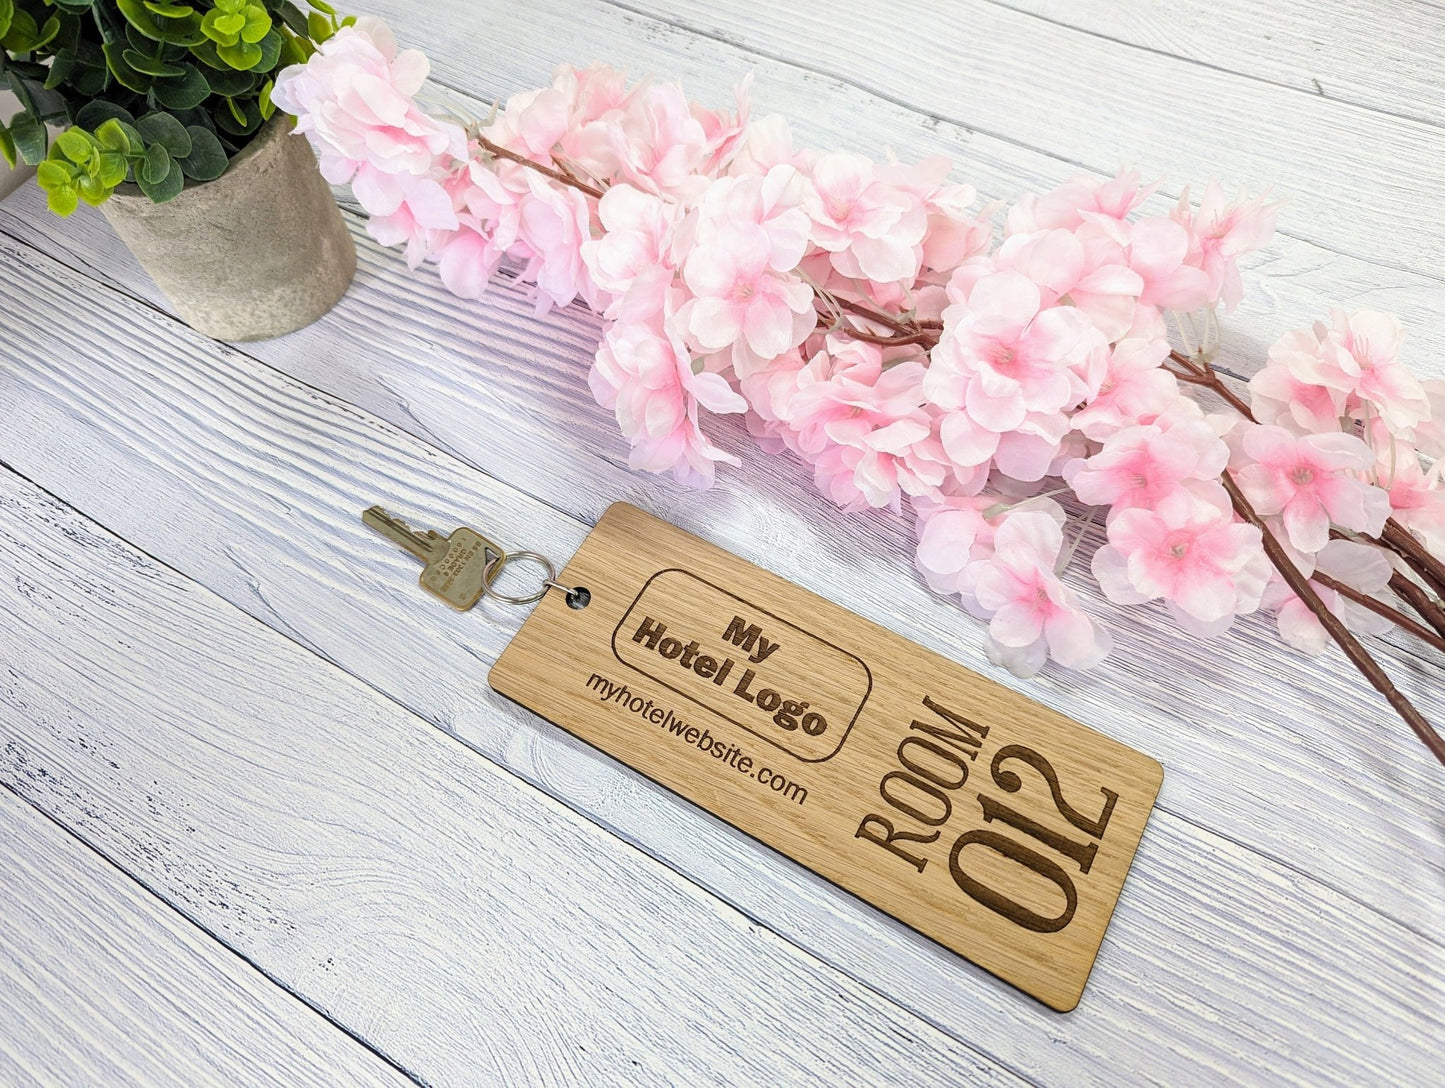 Extra-Large 200x80mm Wooden Hotel Keyrings - Customisable with Hotel Name/Logo & Room Number - Ideal for Luxury Hotels - CherryGroveCraft